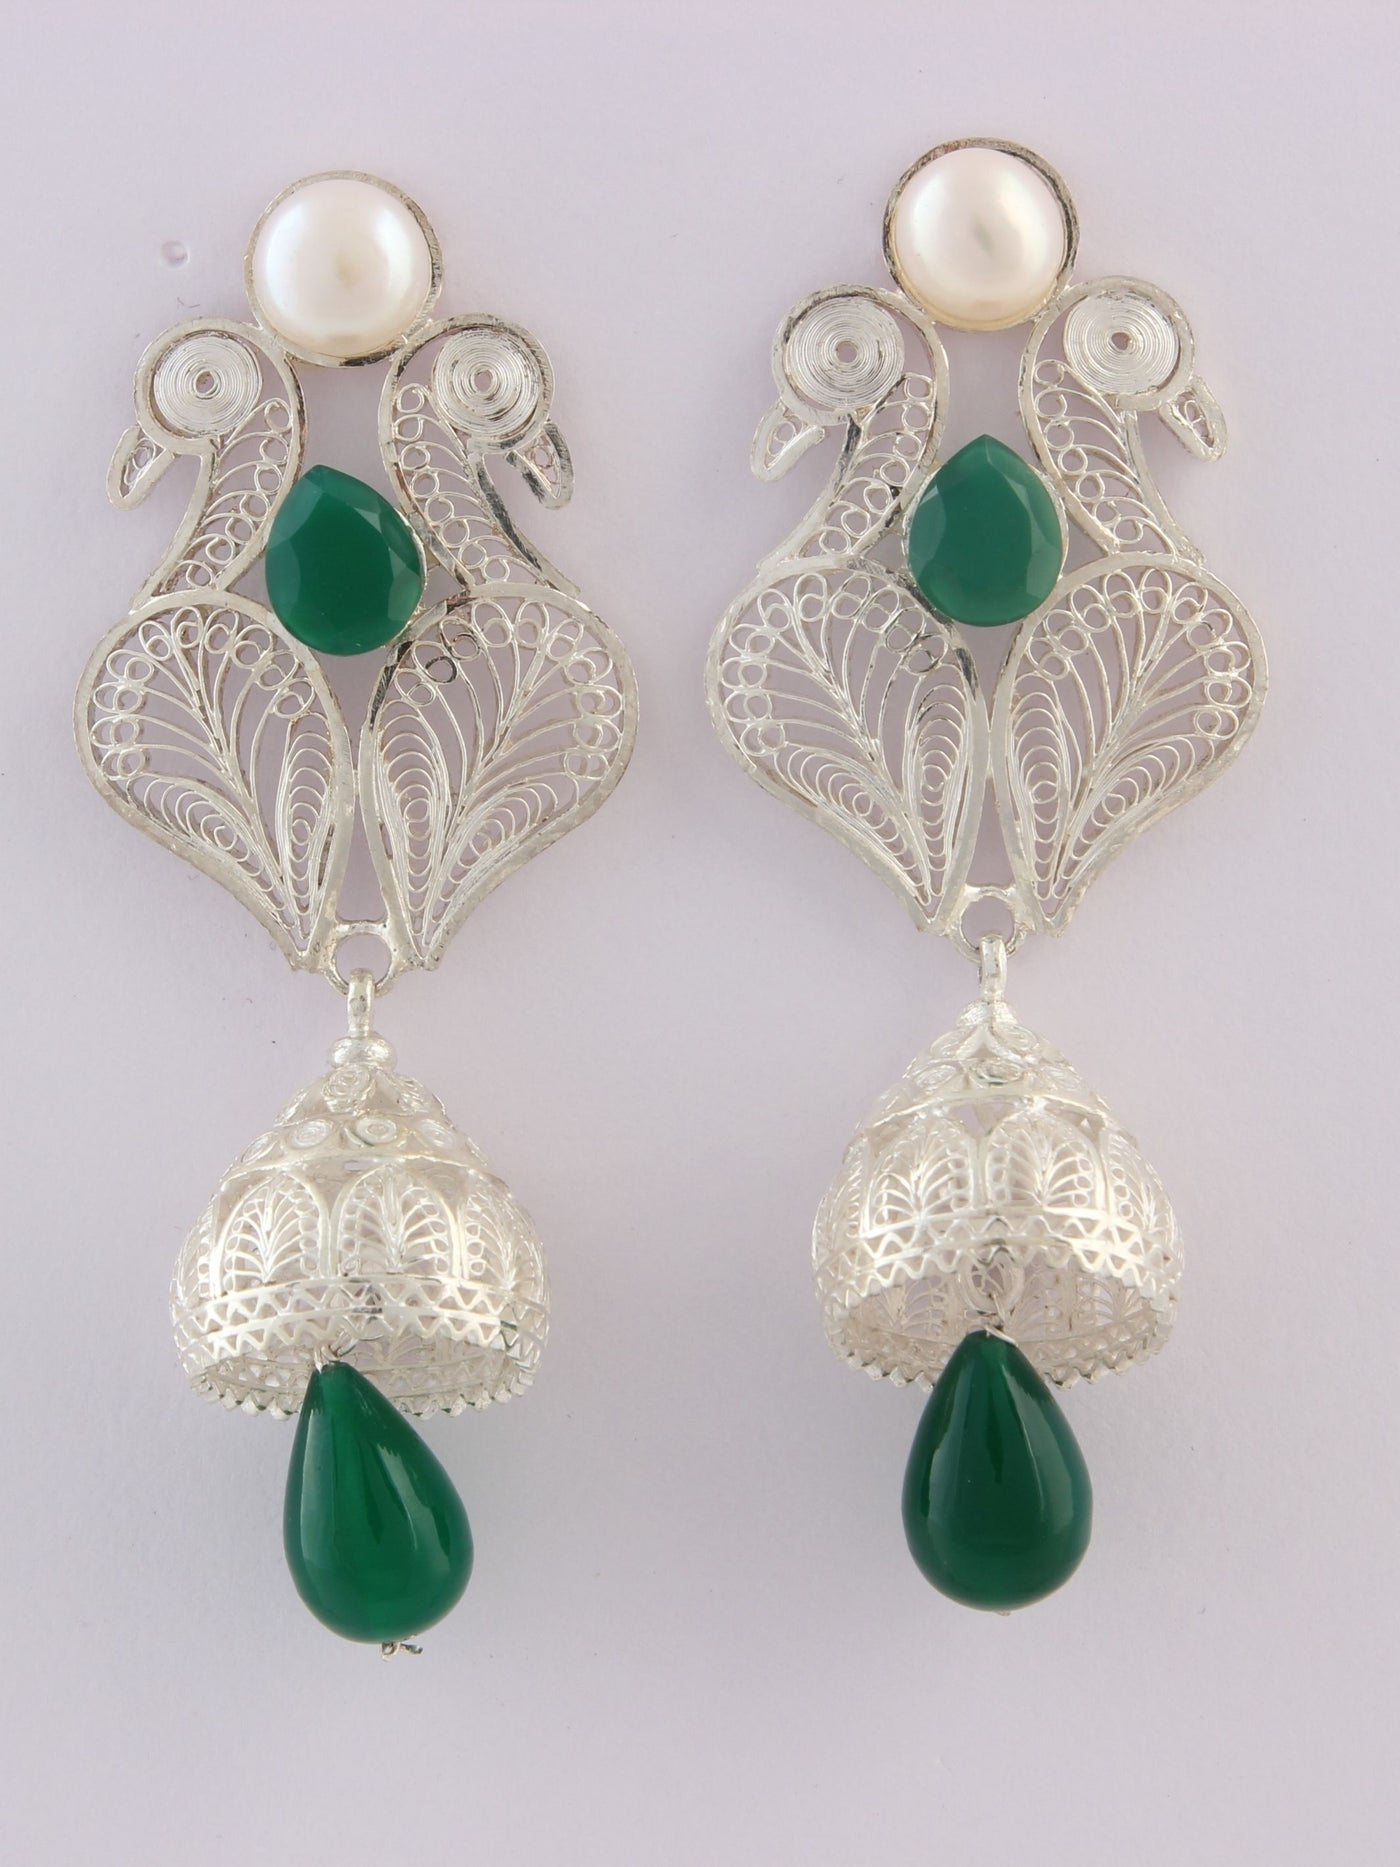 Filigree Silver Earrings with Green Drops - View 1